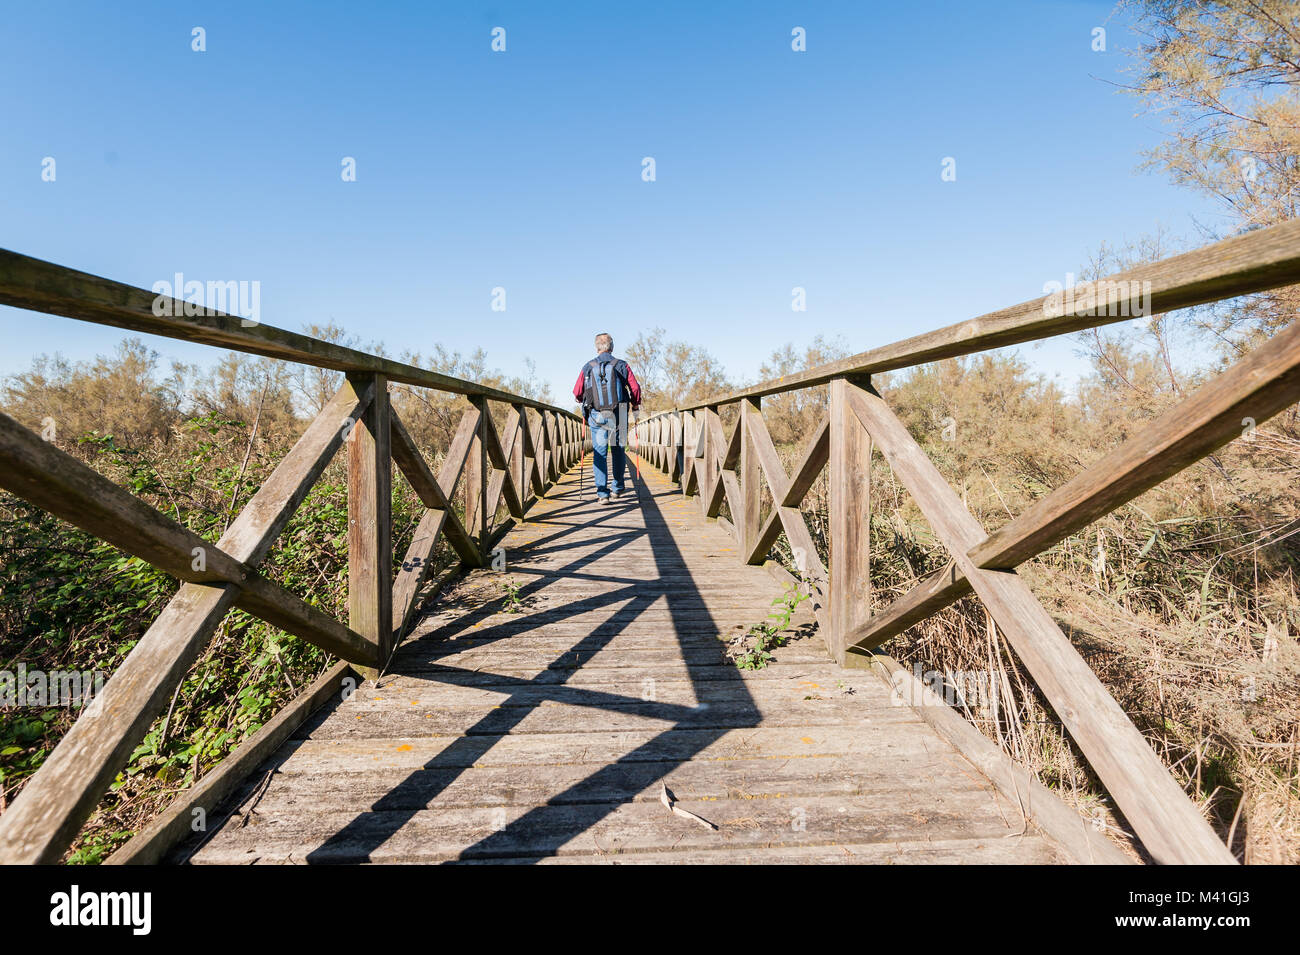 Hiker (60 years old) on a wooden footbridge on the river.   Rear view. Stock Photo